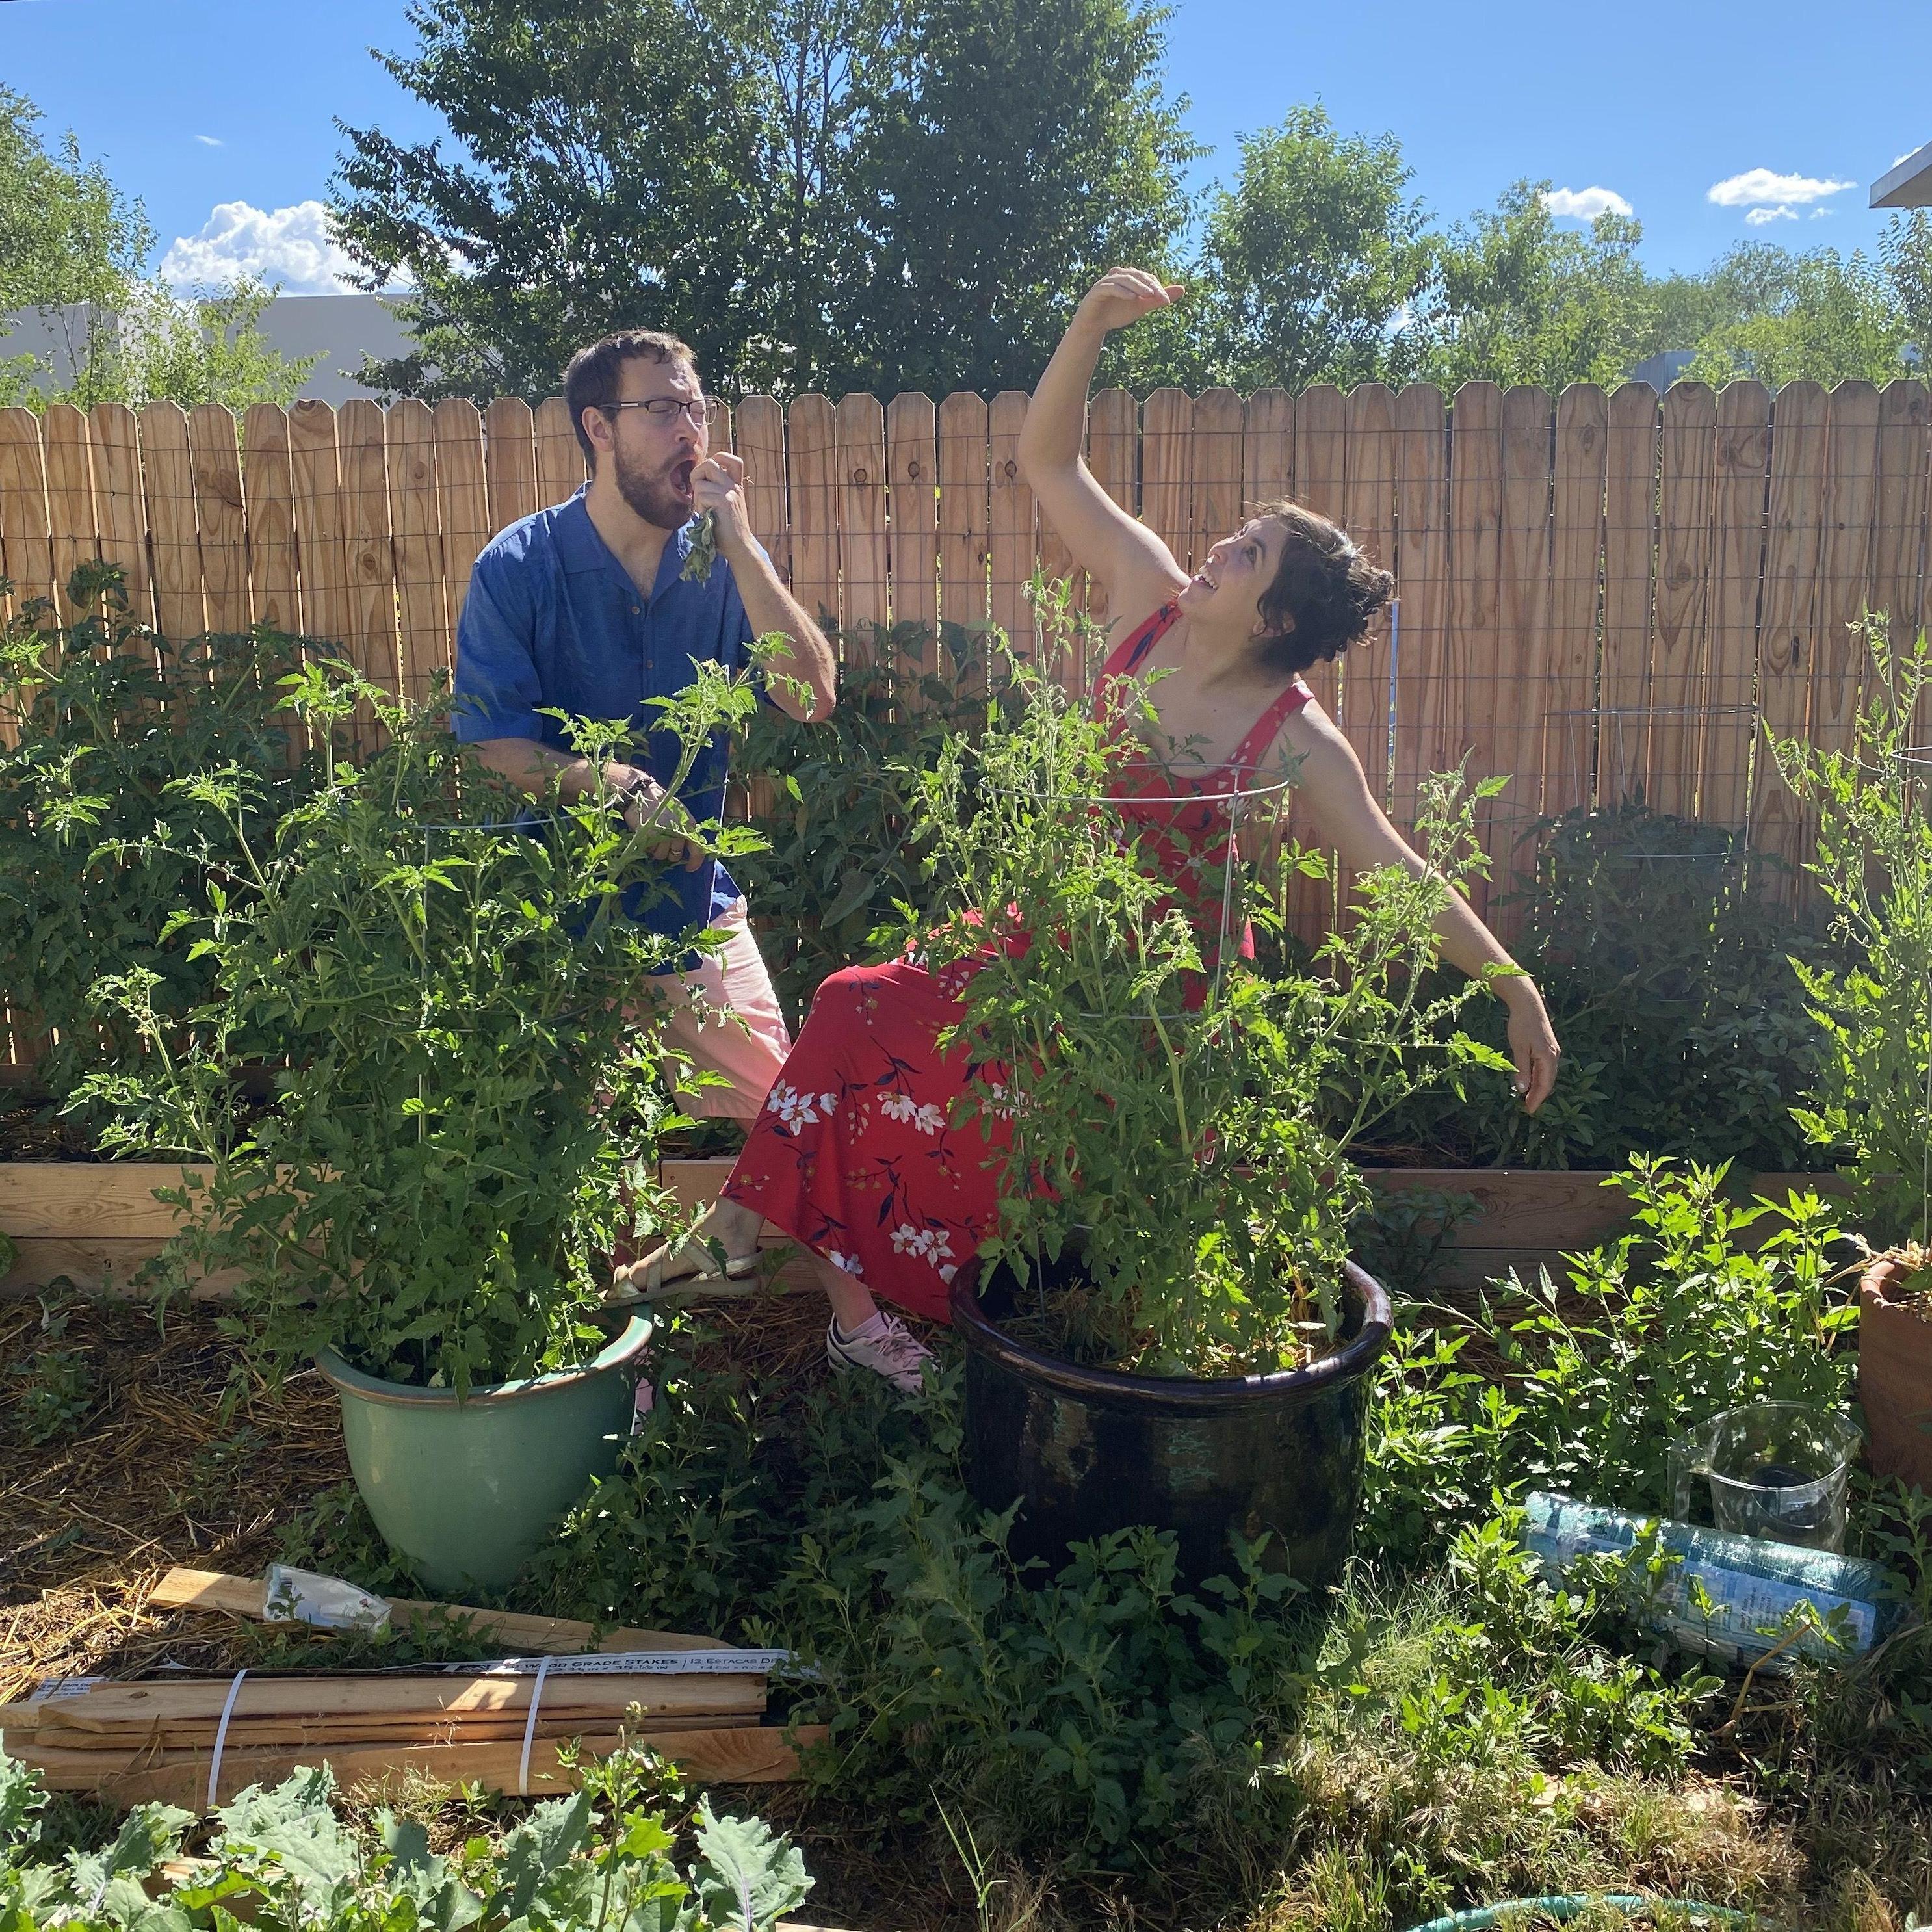 Enjoying the vegetables of our labor together in our first joint garden